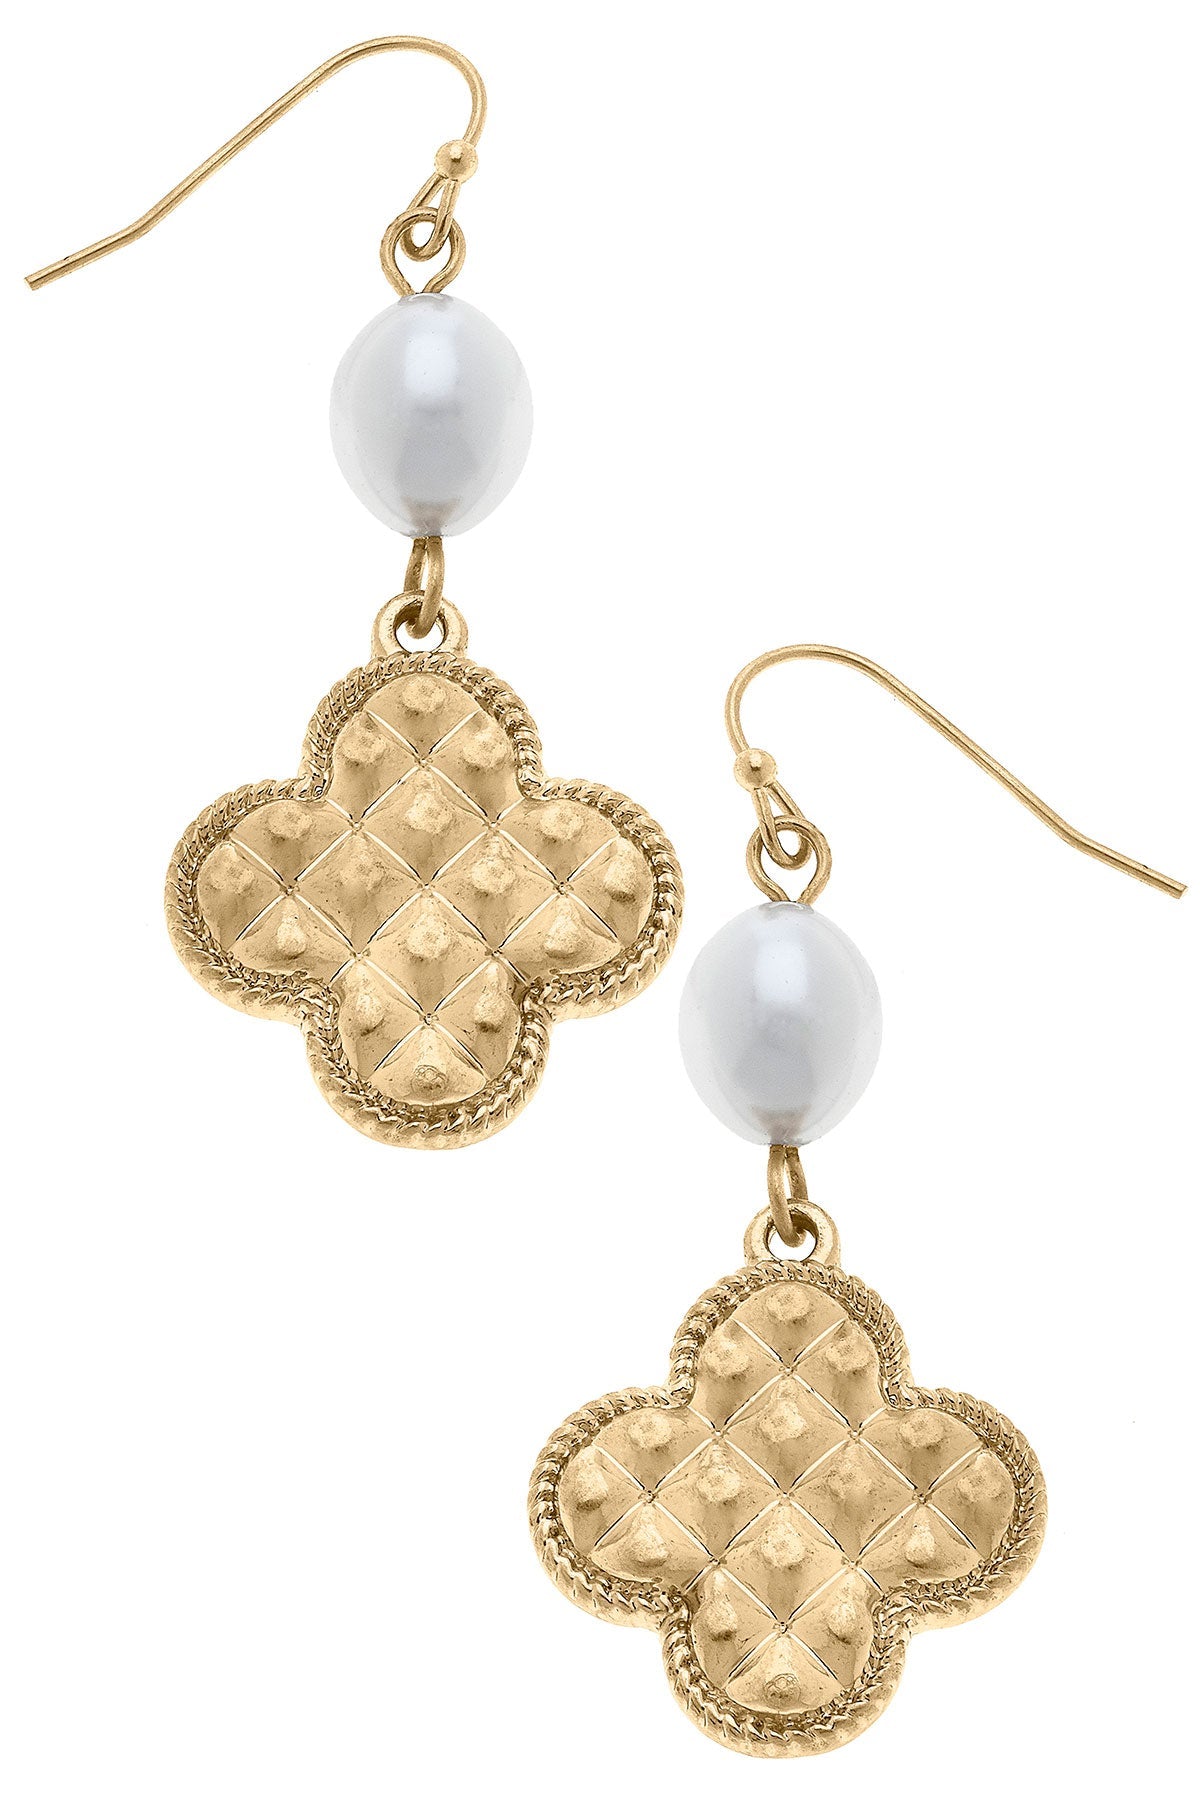 Andee Pearl & Quilted Metal Clover Drop Earrings in Worn Gold